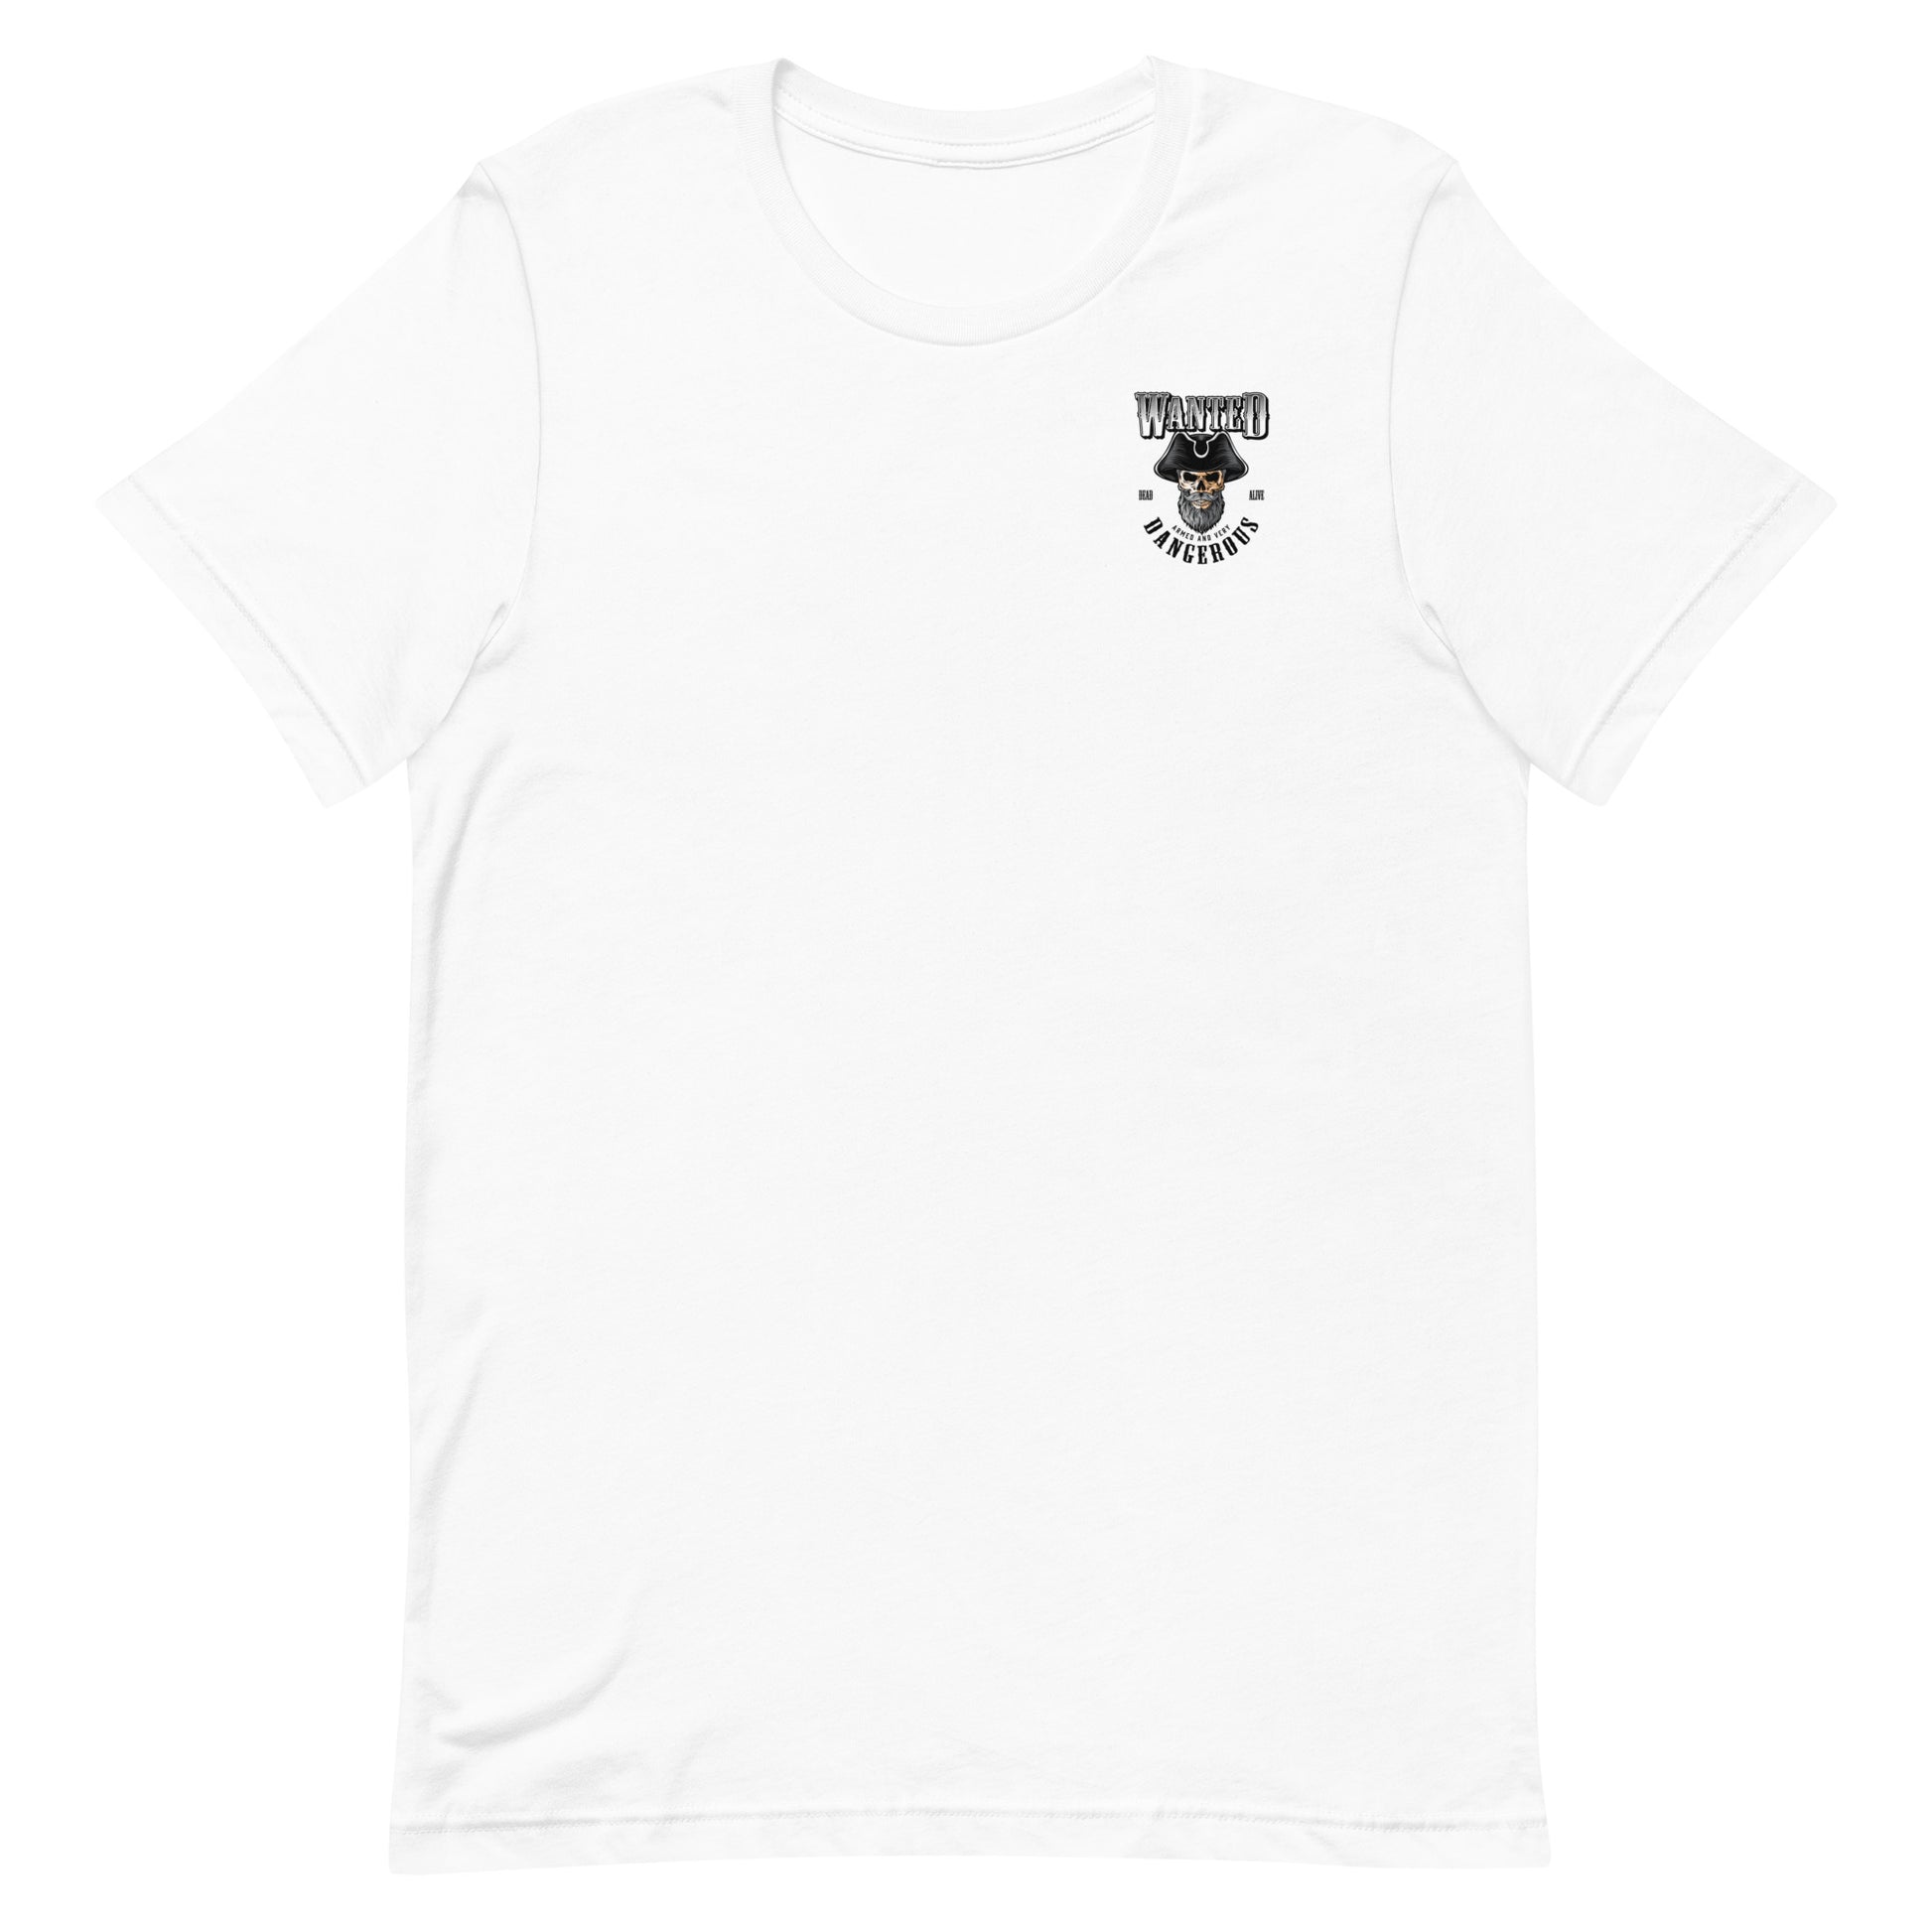 One Love Apparel - Pirate White - T-Shirt